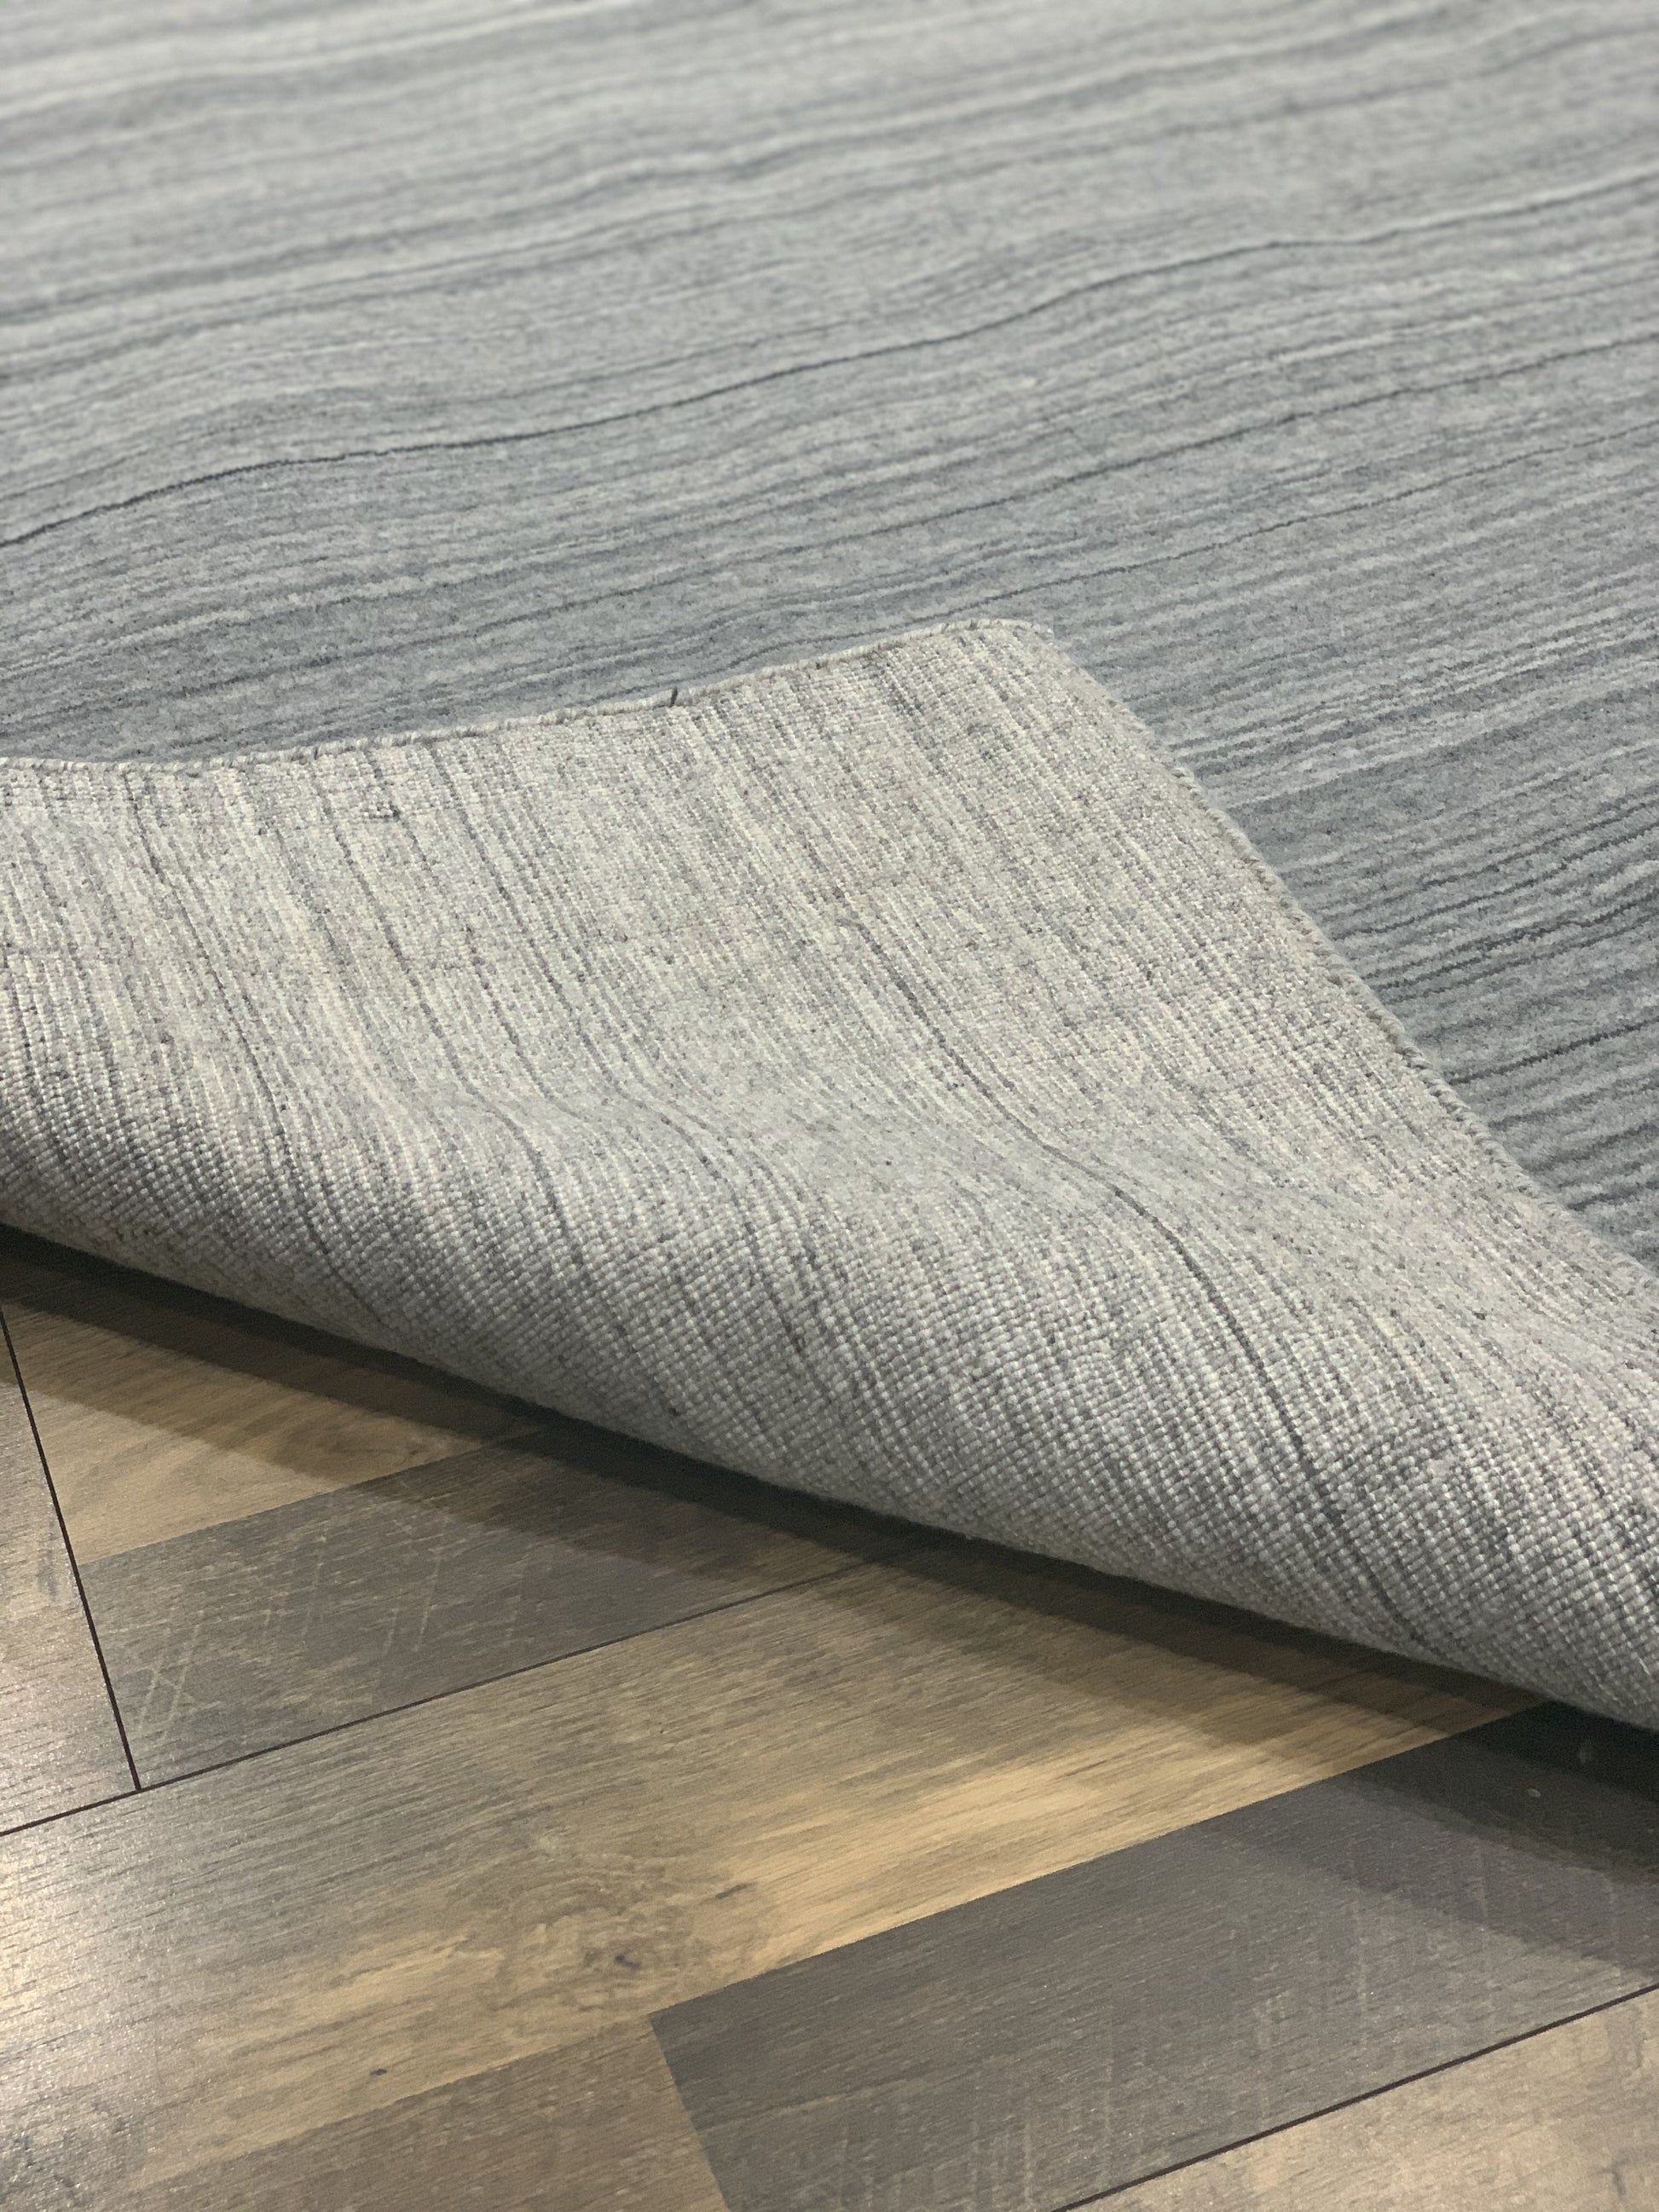 performance rug collection indoor outdoor stain resistant wool polysilk rug good for pets good for kids stone gray solid color carpet rug area rug store affordable online rug store orange county california refined carpet rugs